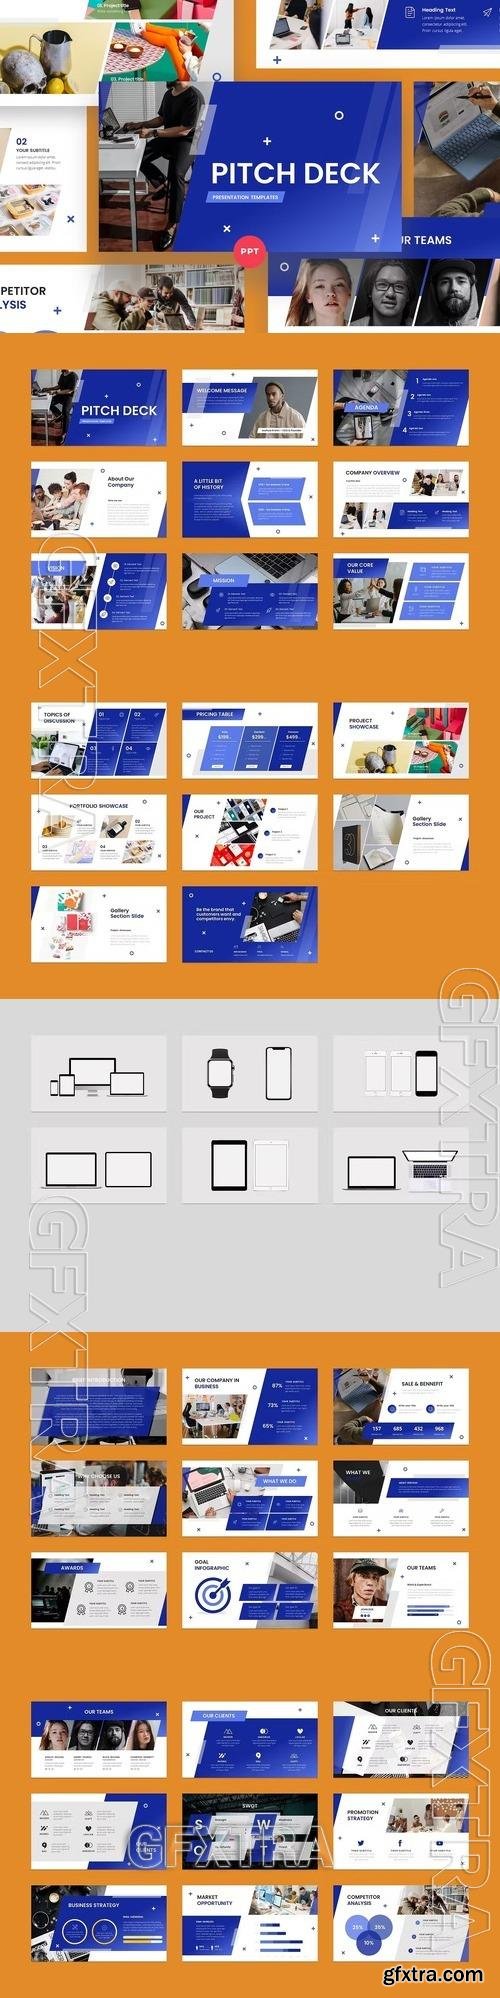 PITCH DECK PowerPoint Template CWDHCCY